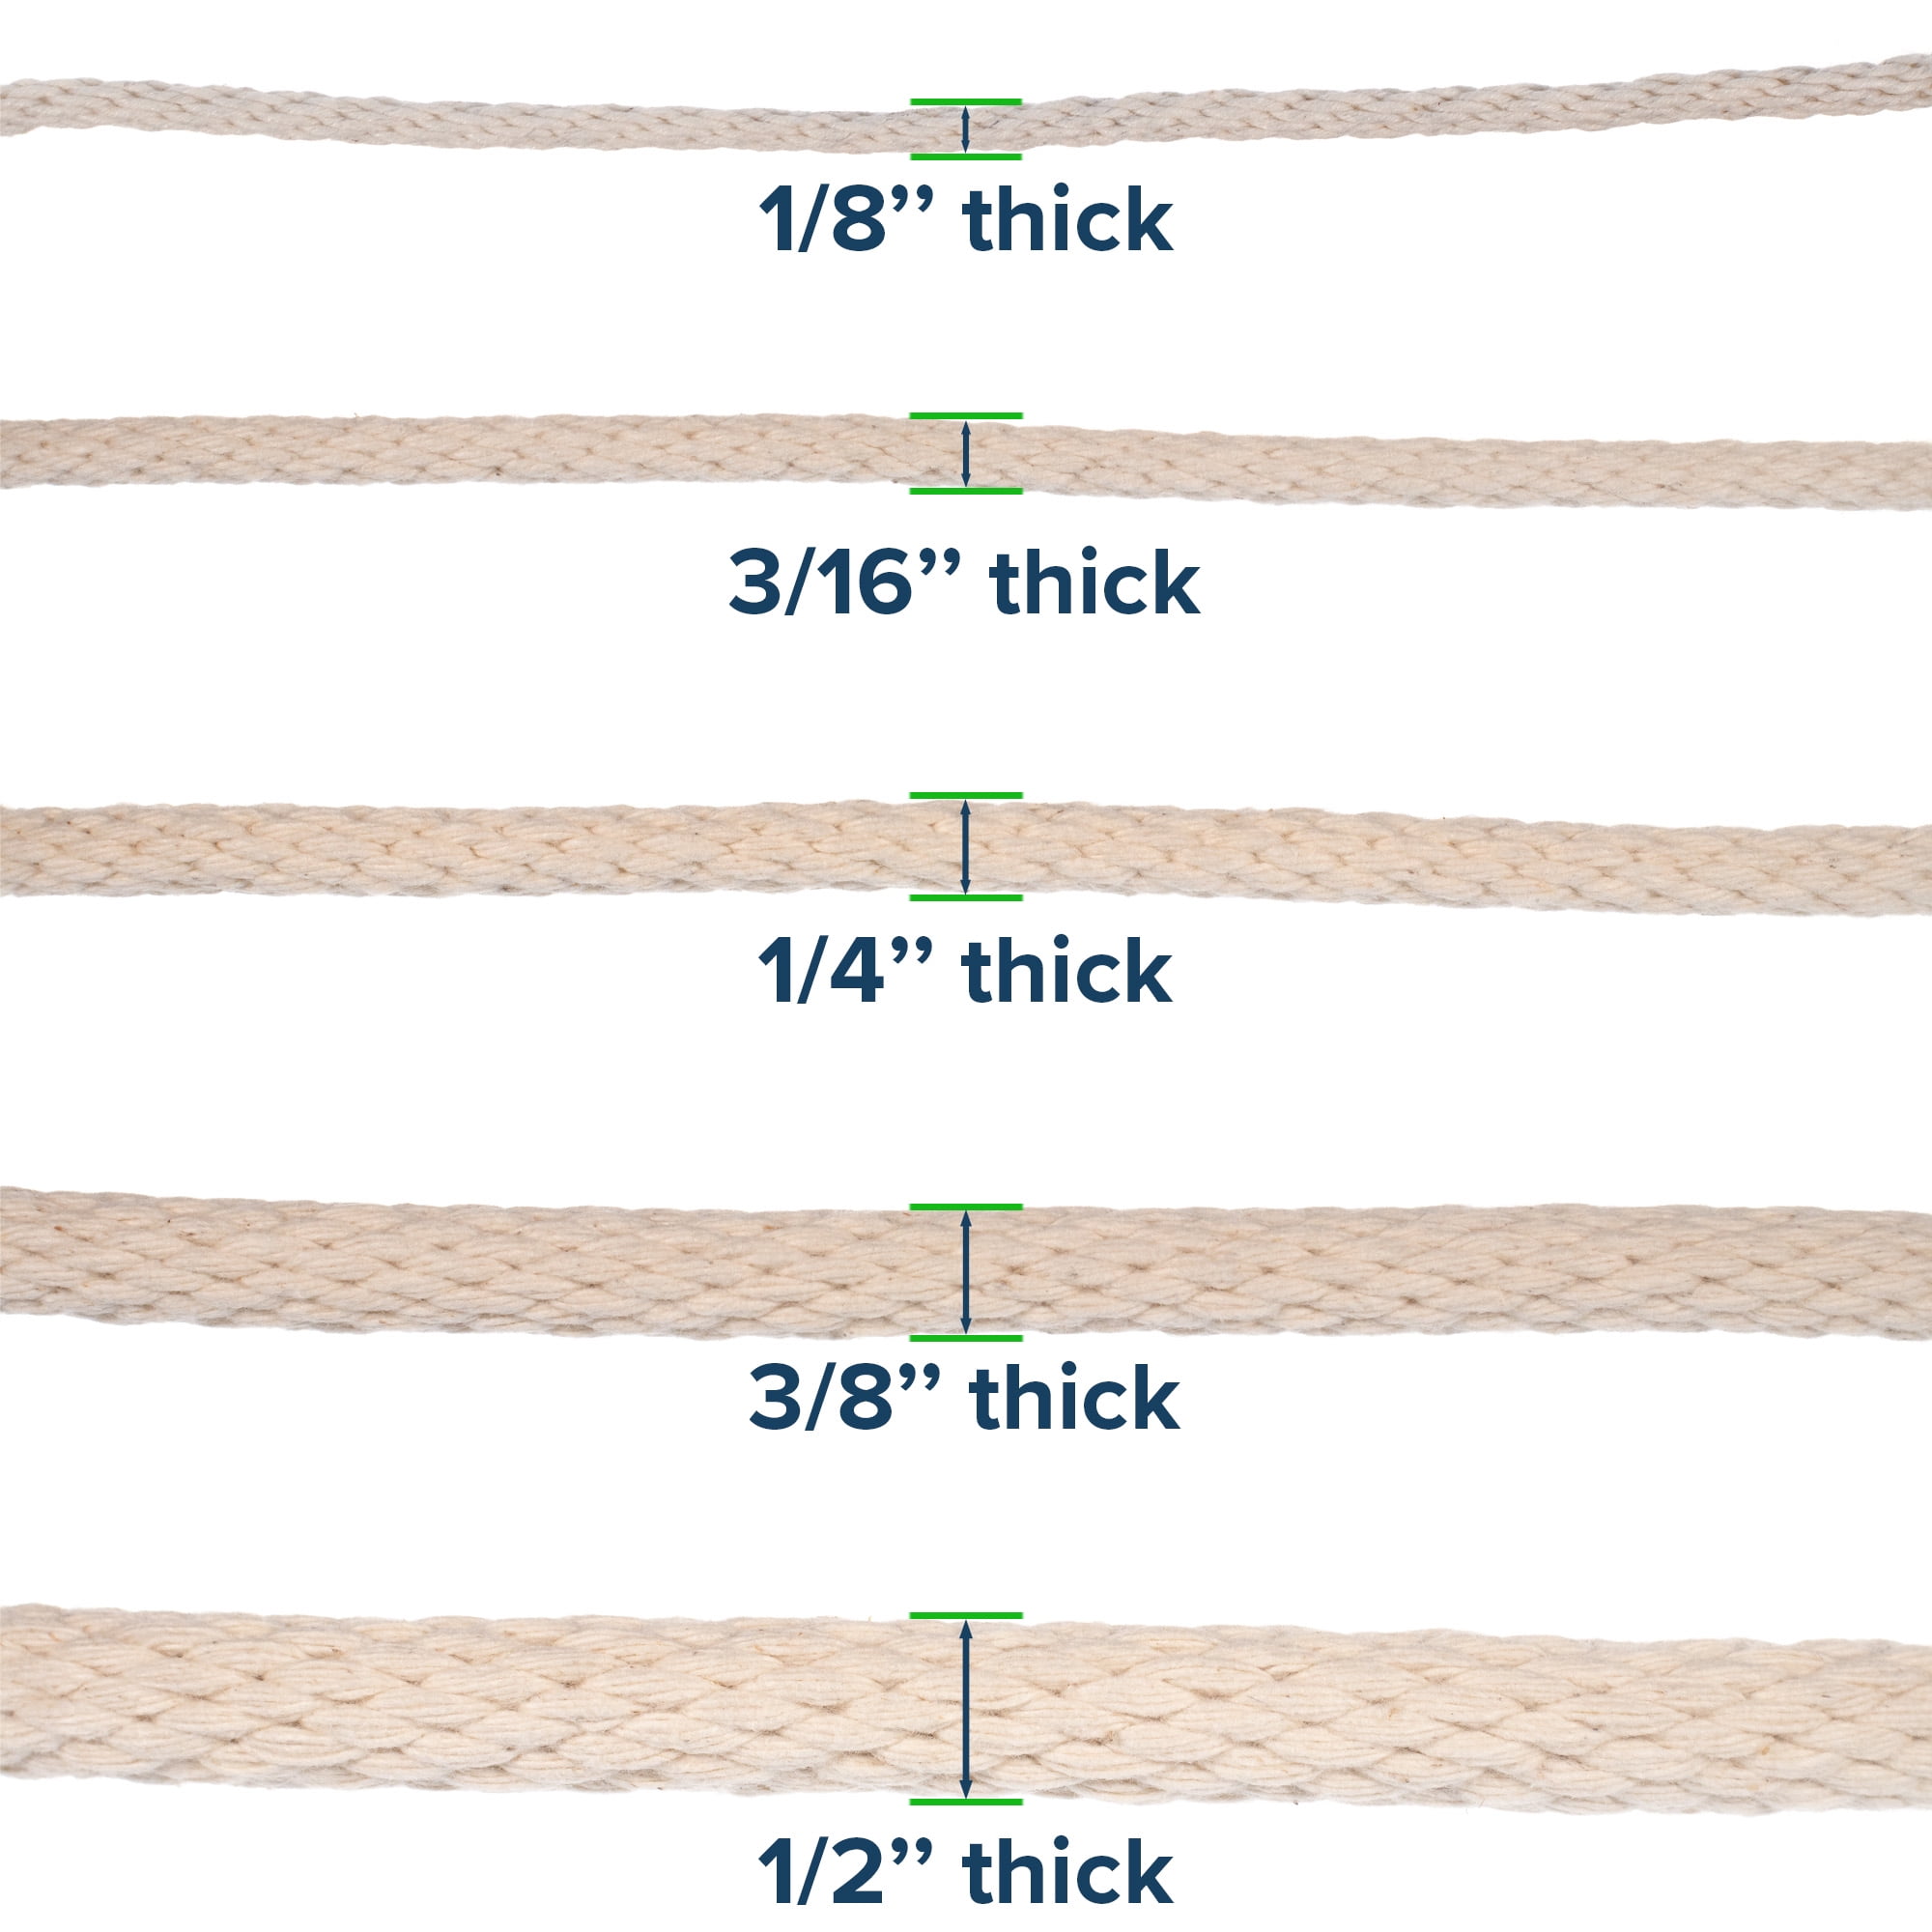 Paracord Planet Solid Braid Cotton Rope - 1/8, 3/16, 1/4, 3/8, & 1/2  Diameters - 10-1000 Foot Lengths - Cotton Weeping Cord 